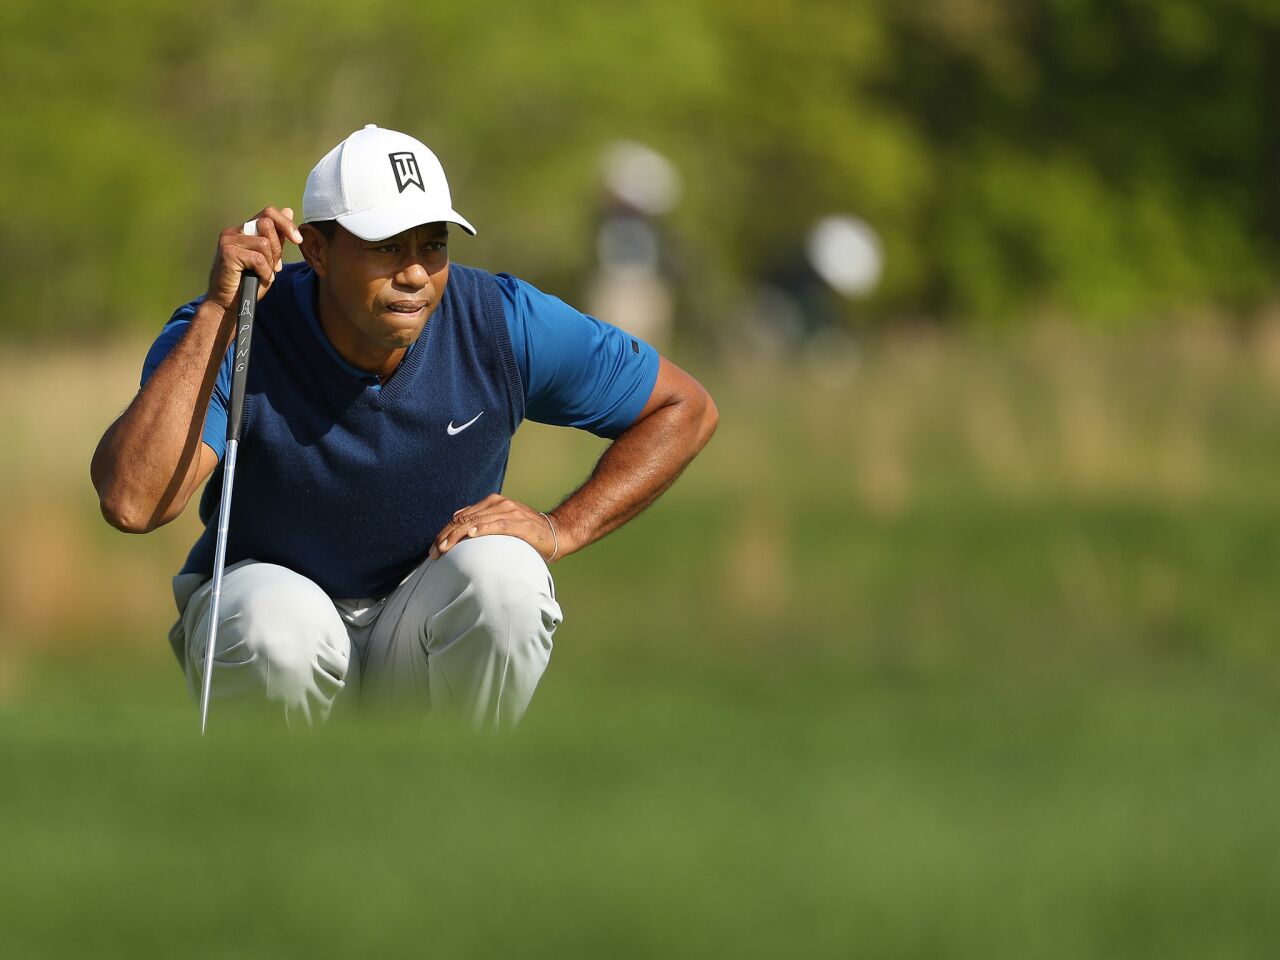 Tiger Woods lines up a putt on the 11th green during the first round of the 2019 PGA Championship at the Bethpage Black course in Farmingdale, N.Y.